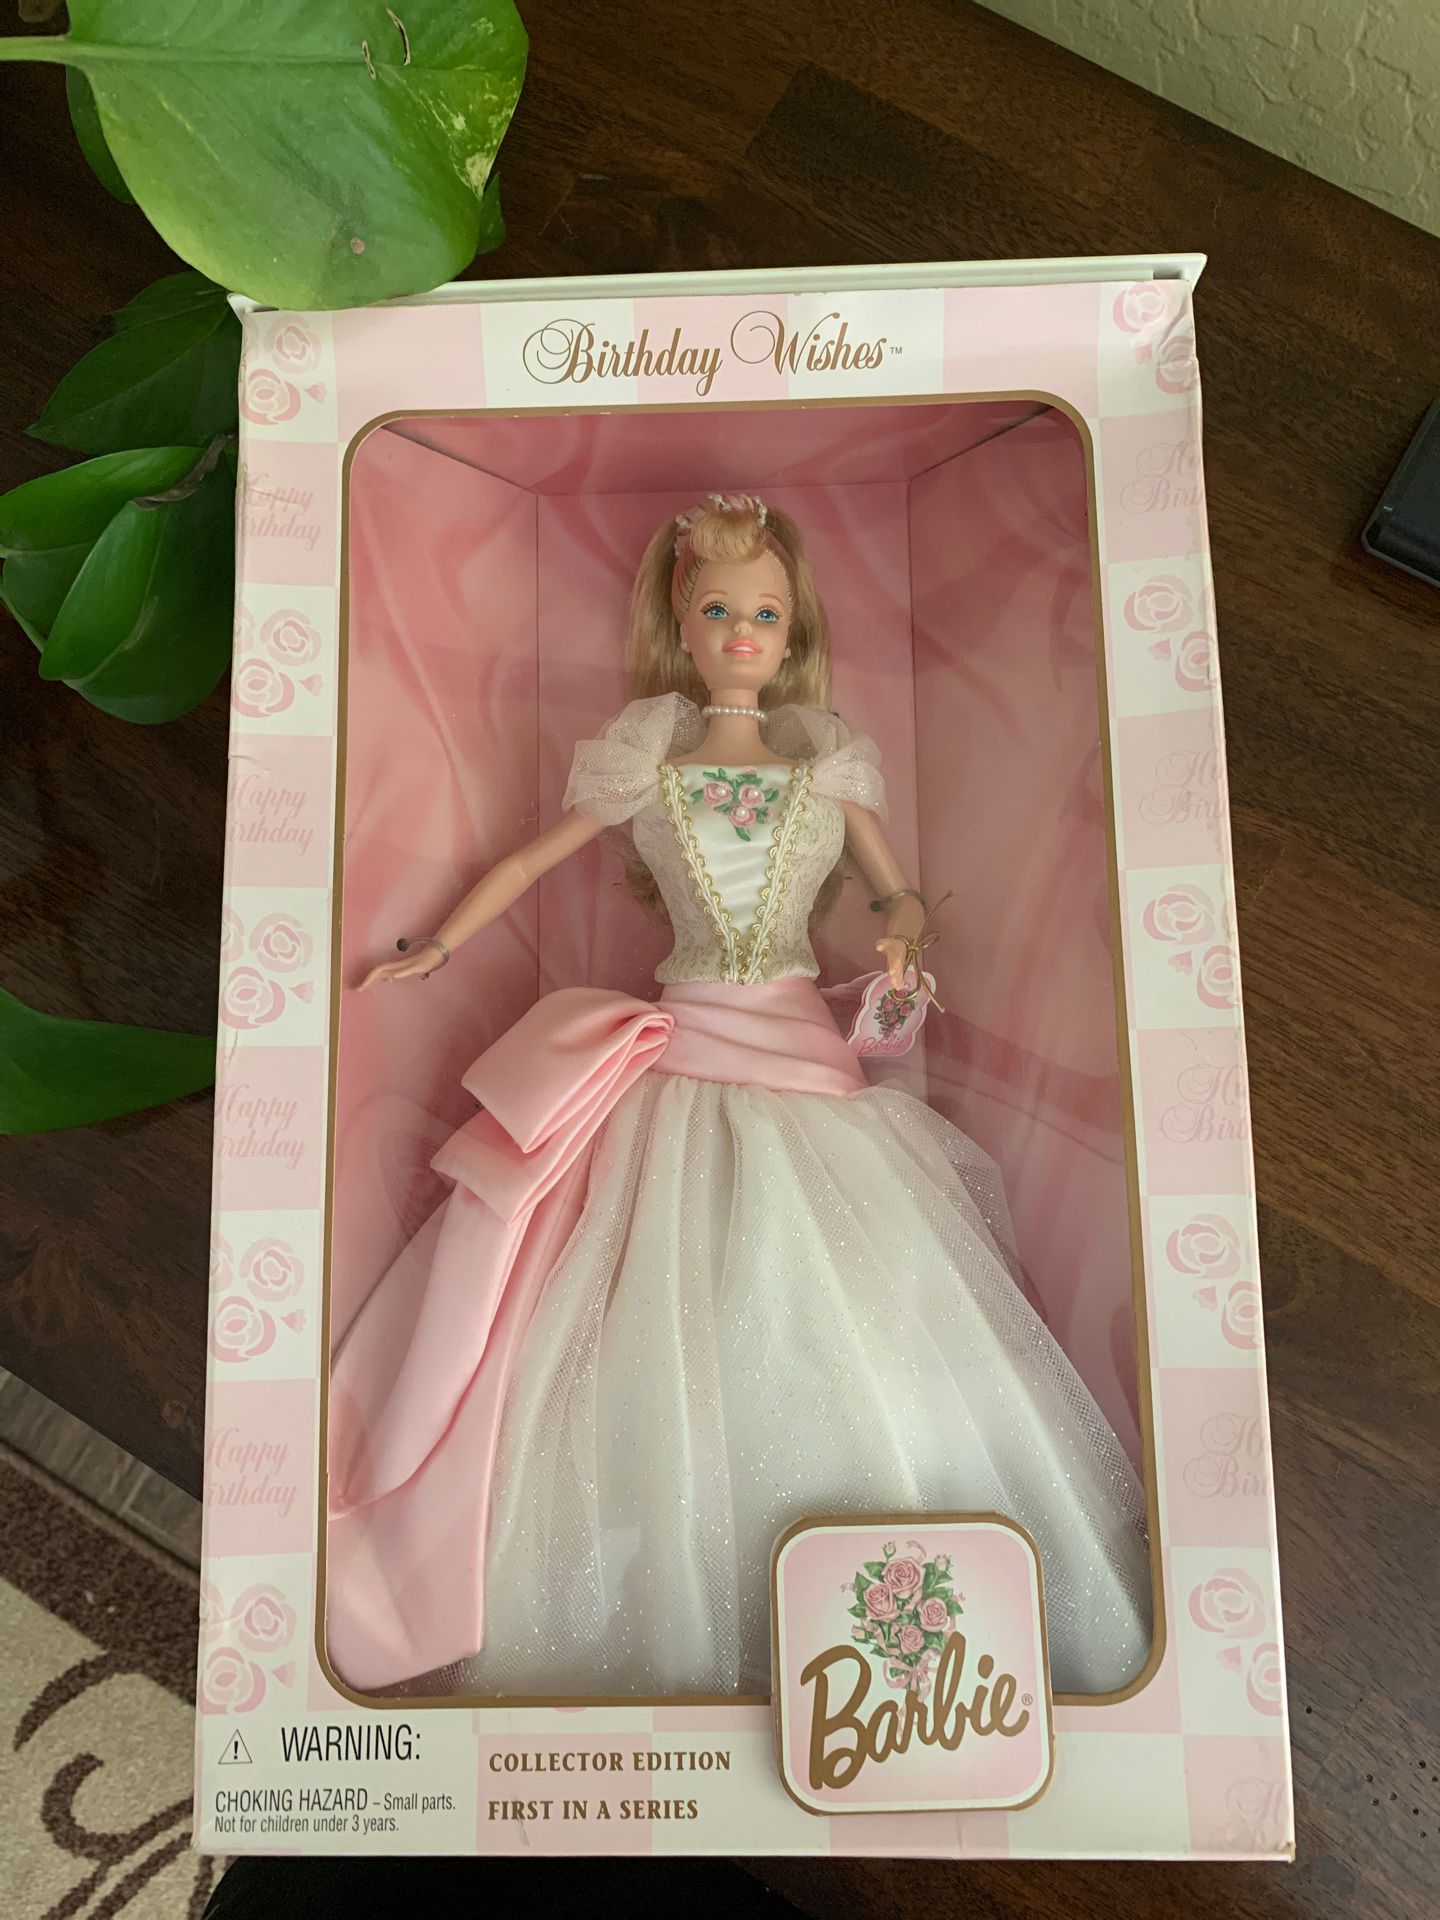 Birthday Wishes Collectible Barbie 1998